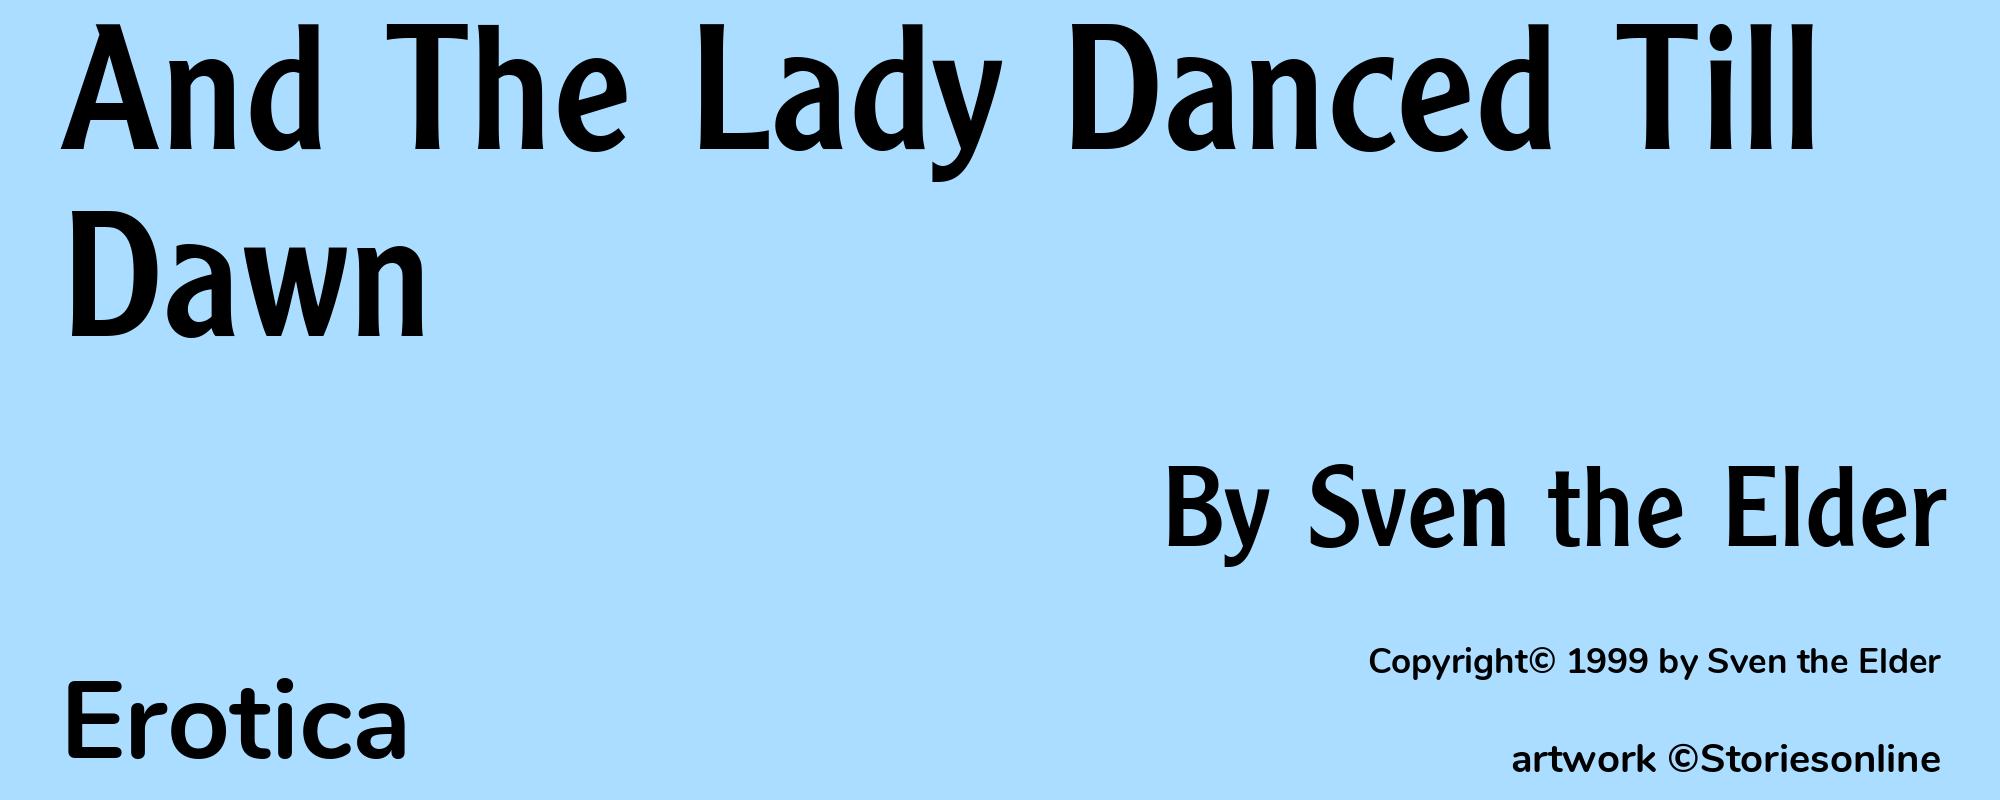 And The Lady Danced Till Dawn - Cover